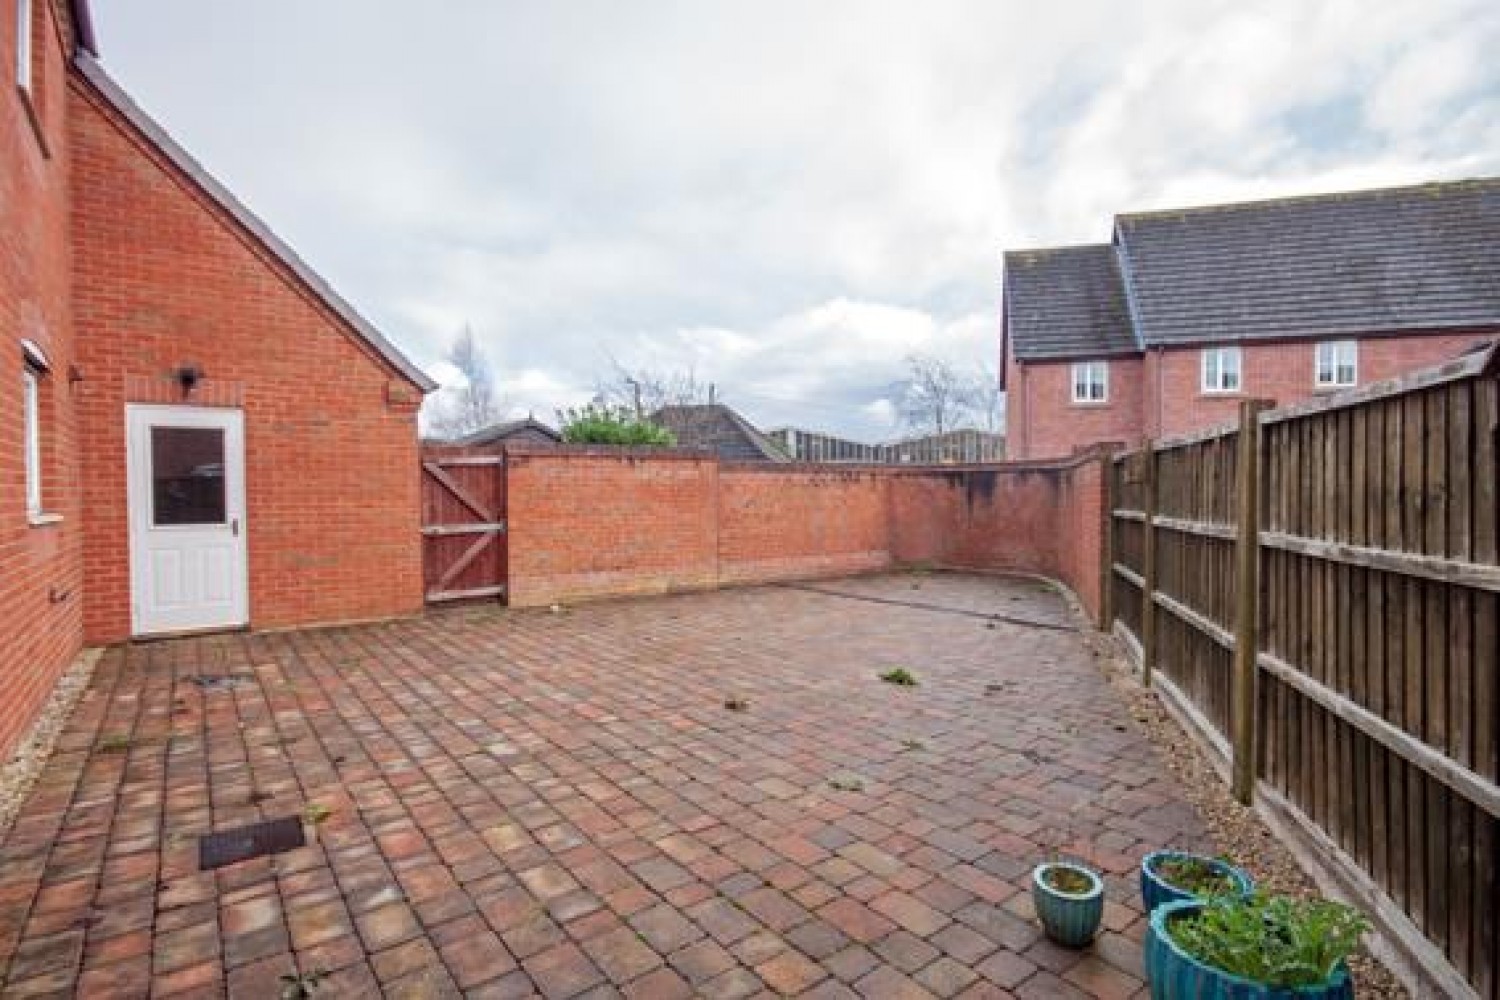 Silverdale Drive, Burntwood, WS7 3UY